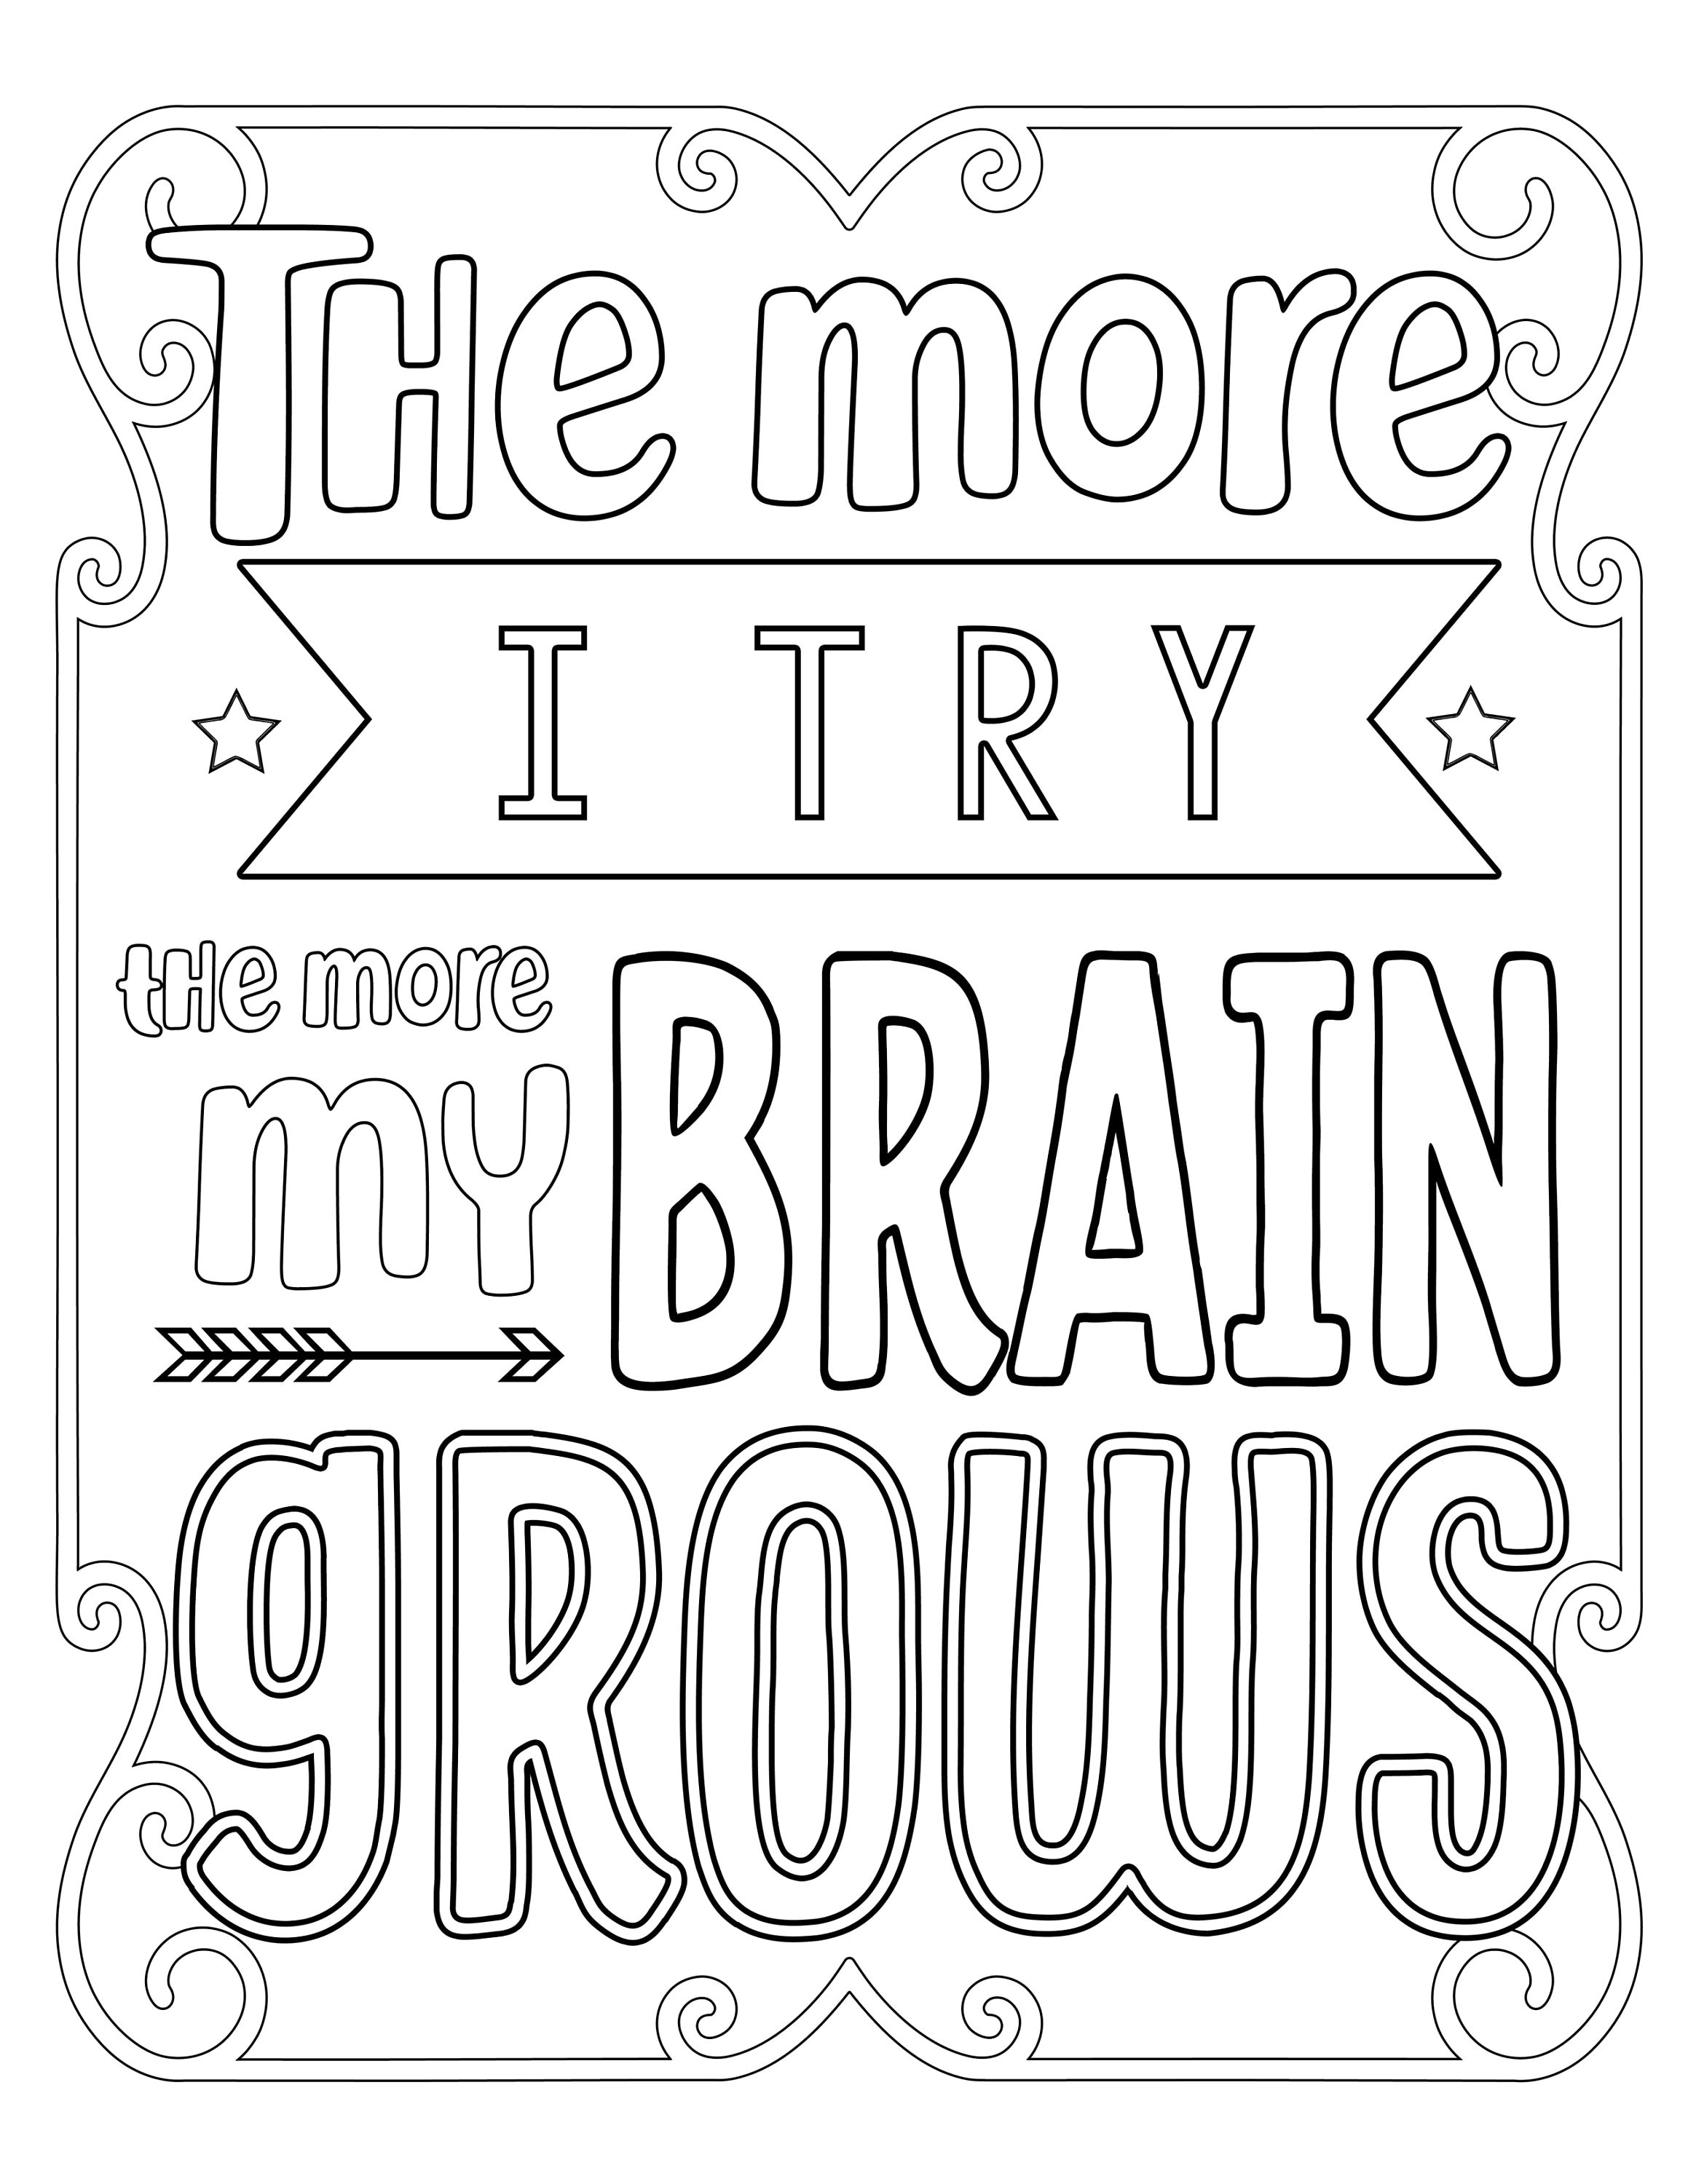 Free Coloring Page Growth Mindset Quote Coloring Pages Free | Images ...